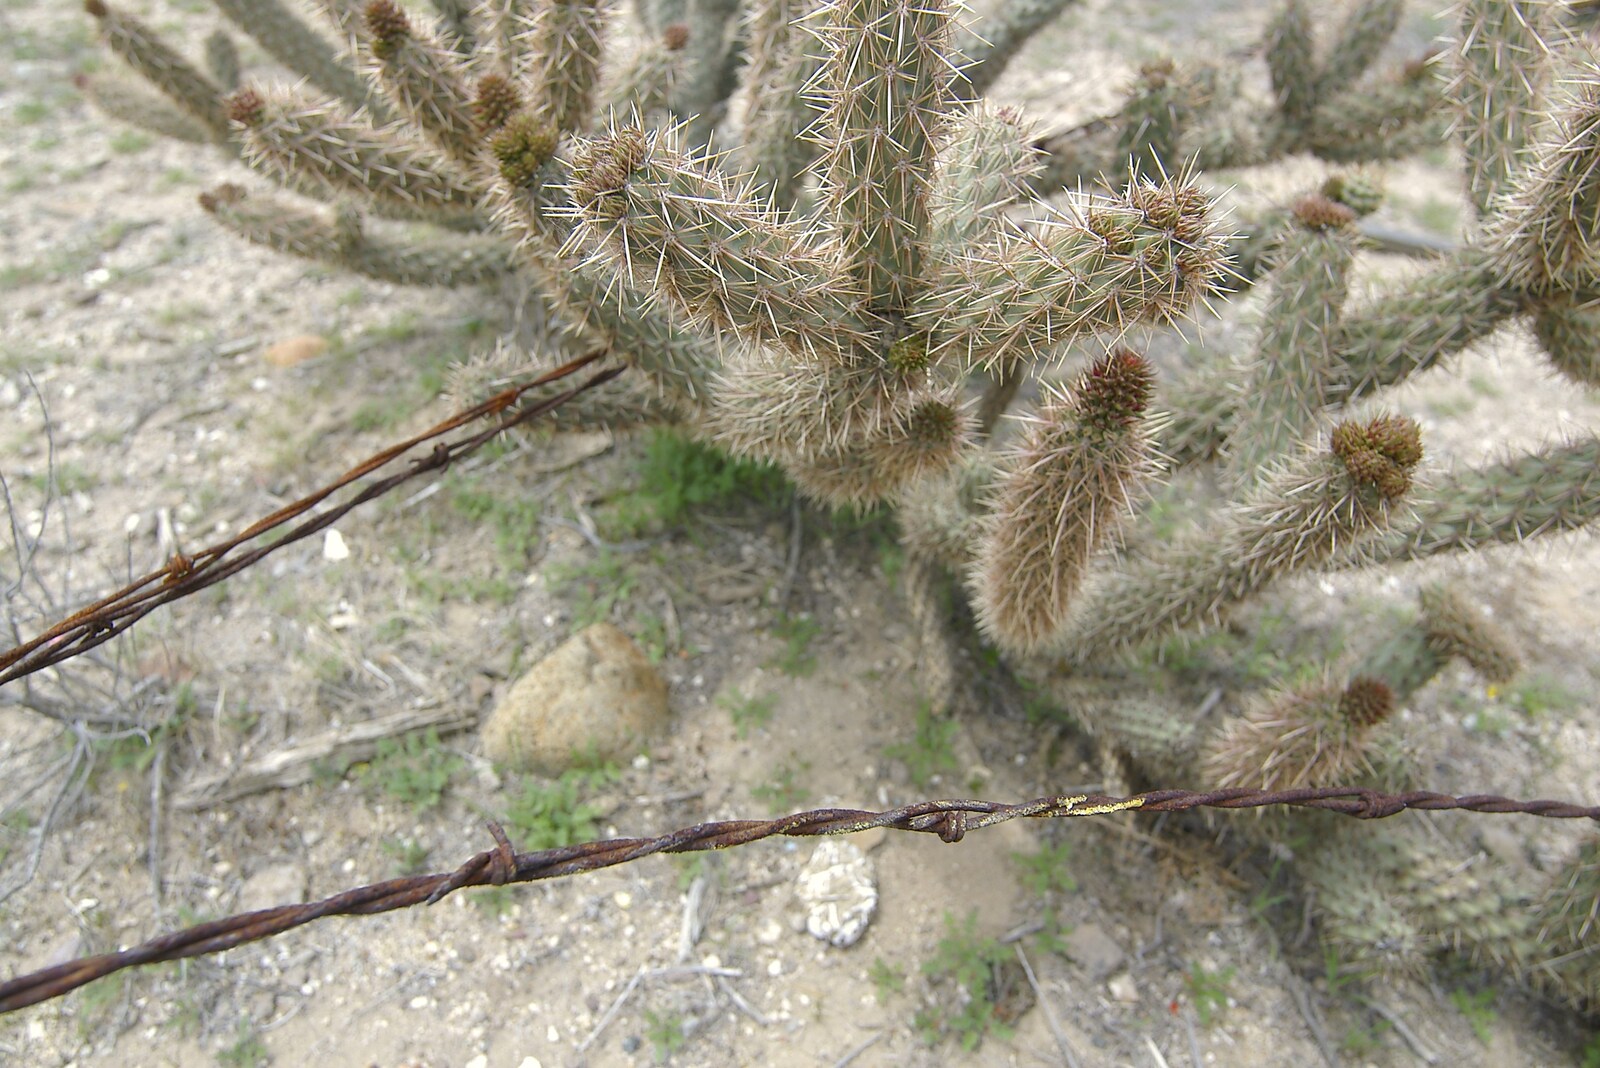 Barbed wire and cactus from San Diego Seven: The Desert and the Dunes, Arizona and California, US - 22nd April